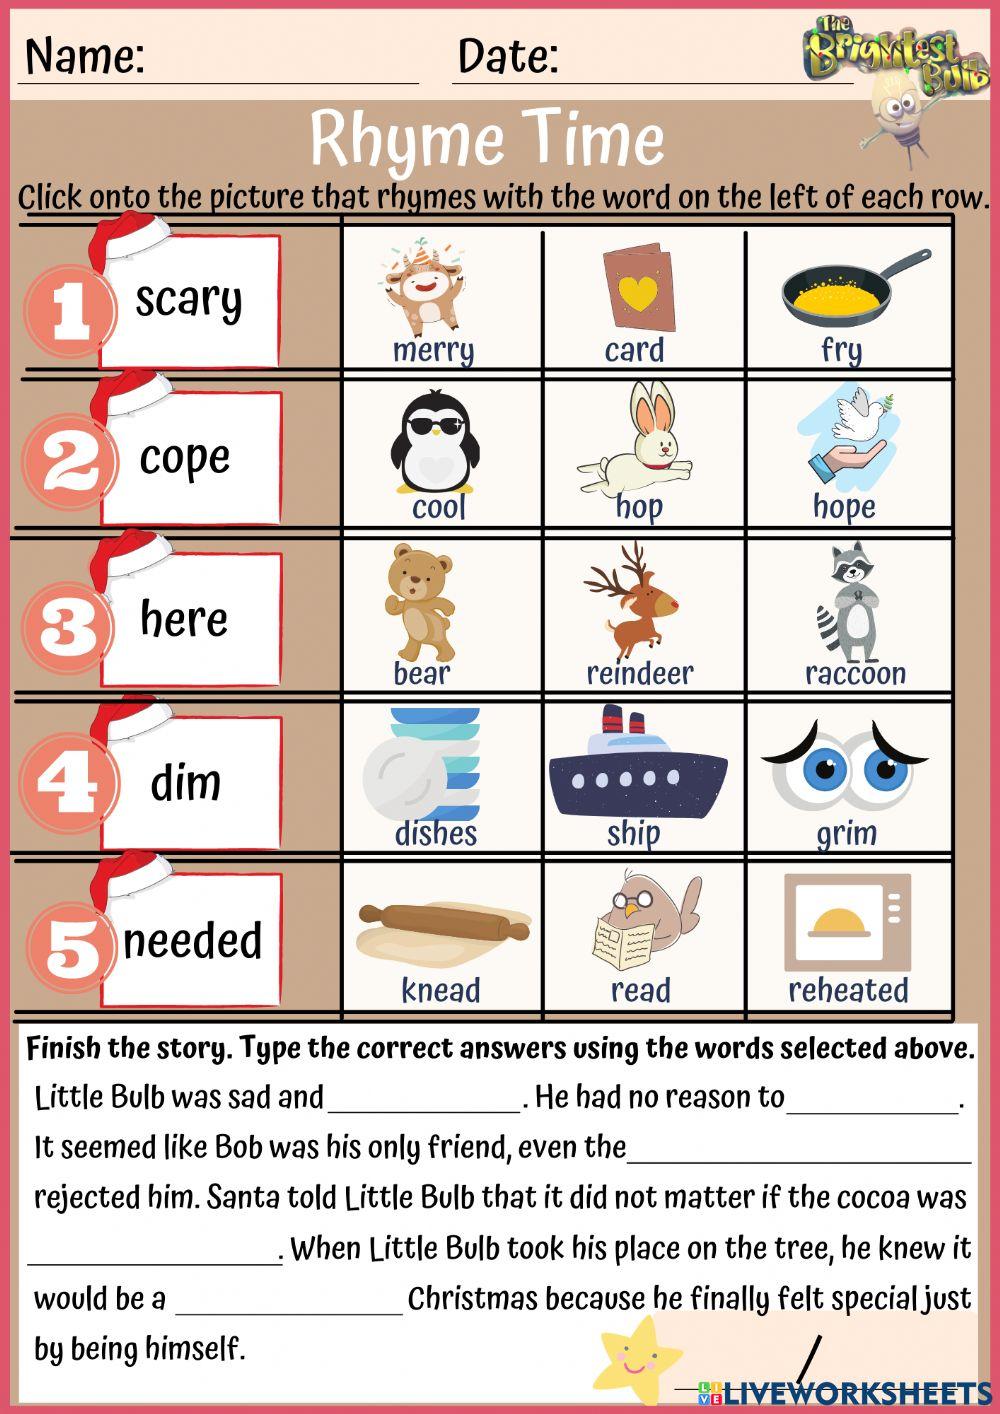 Rhyme Time exercise | Live Worksheets